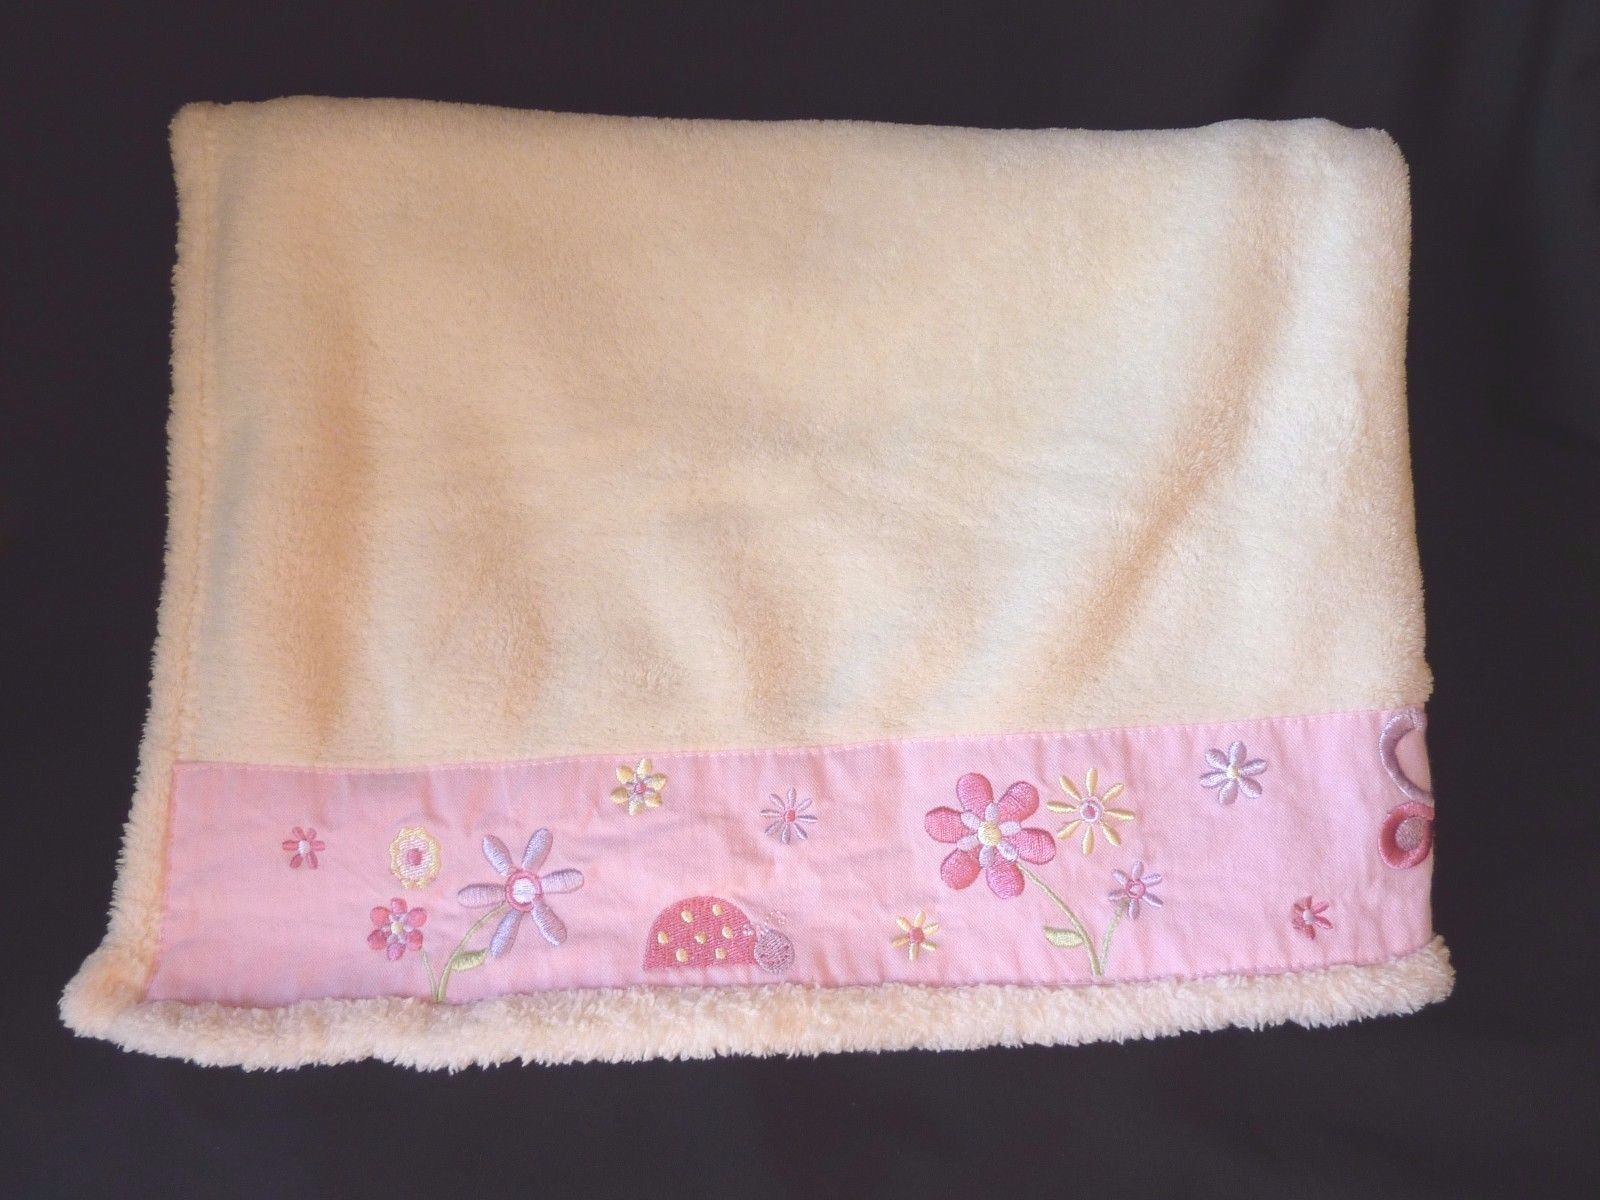 Small Wonders Cream Beige Butterfly Flowers Ladybug Baby Blanket Embroidered - $39.15